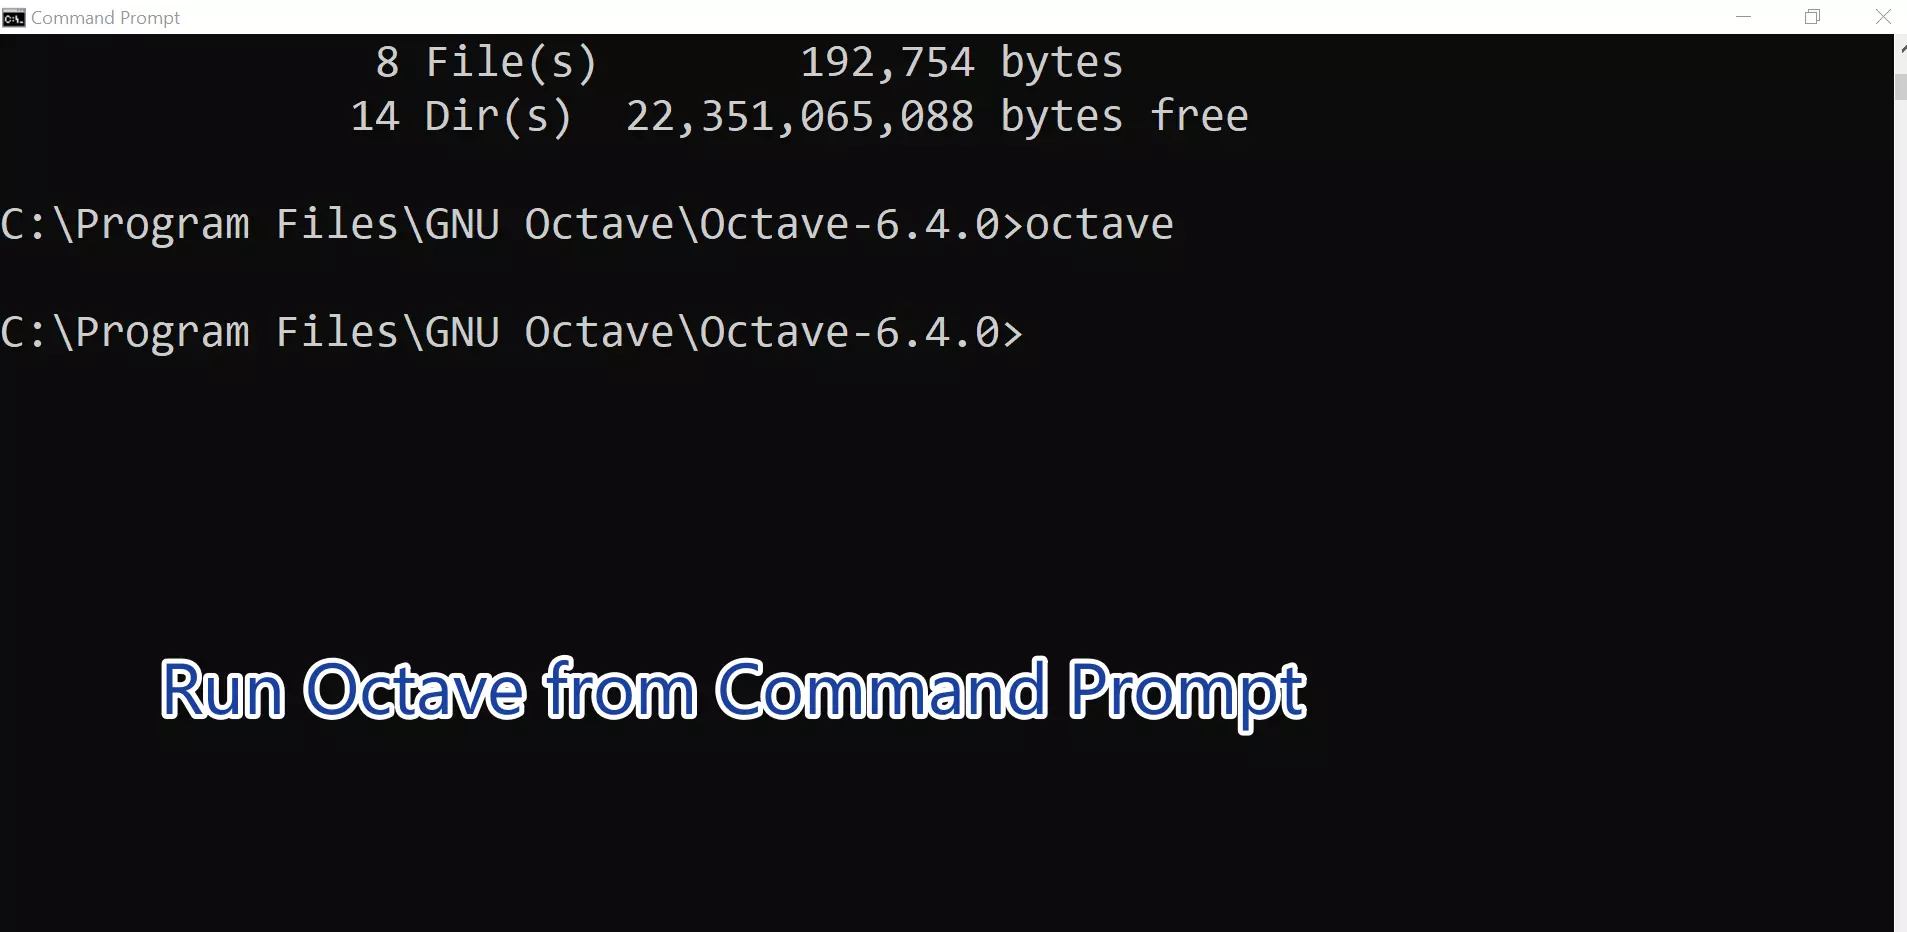 Run Octave from Command Prompt